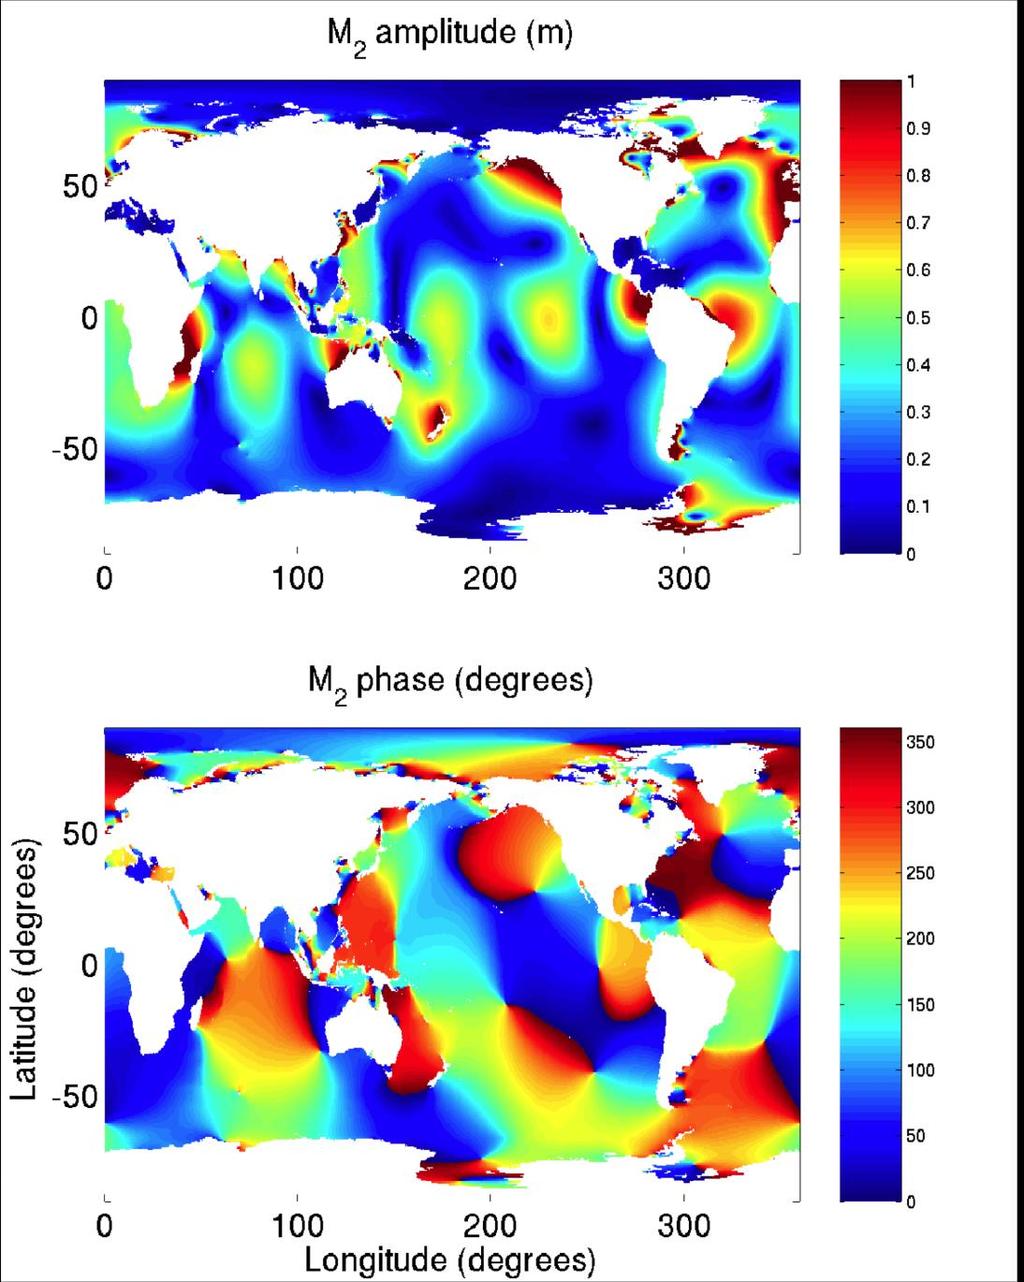 This plot shows the amplitude and phase of the principal lunar semidiurnal tide (M 2 ) in the ocean, as measured by satellite altimeters Note that